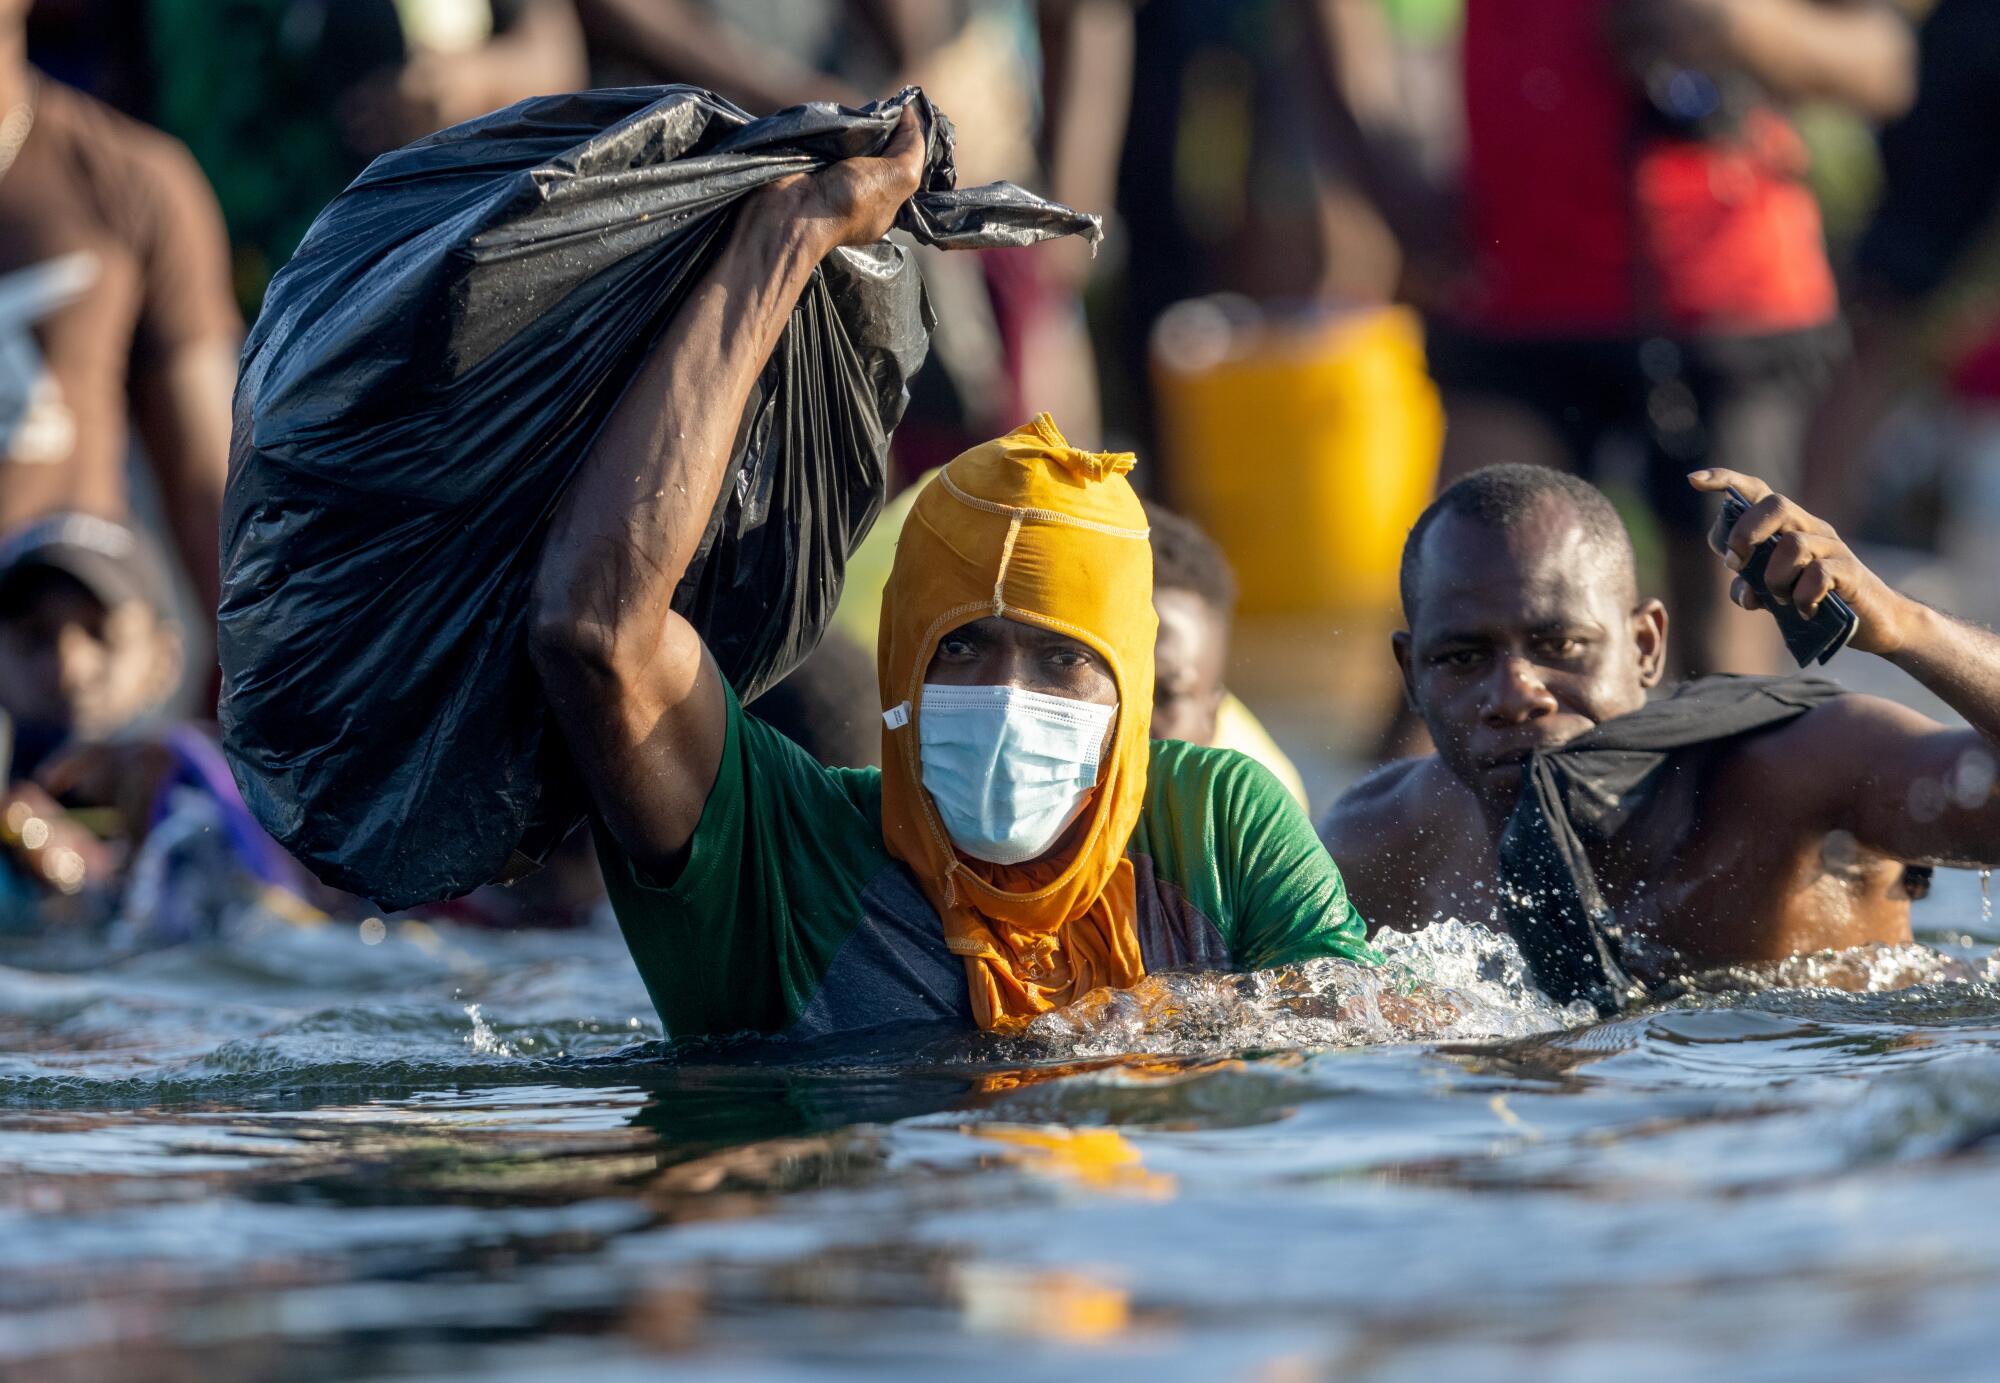 Some Haitians try crossing the Rio Grande while holding their belongings in a garbage bag.